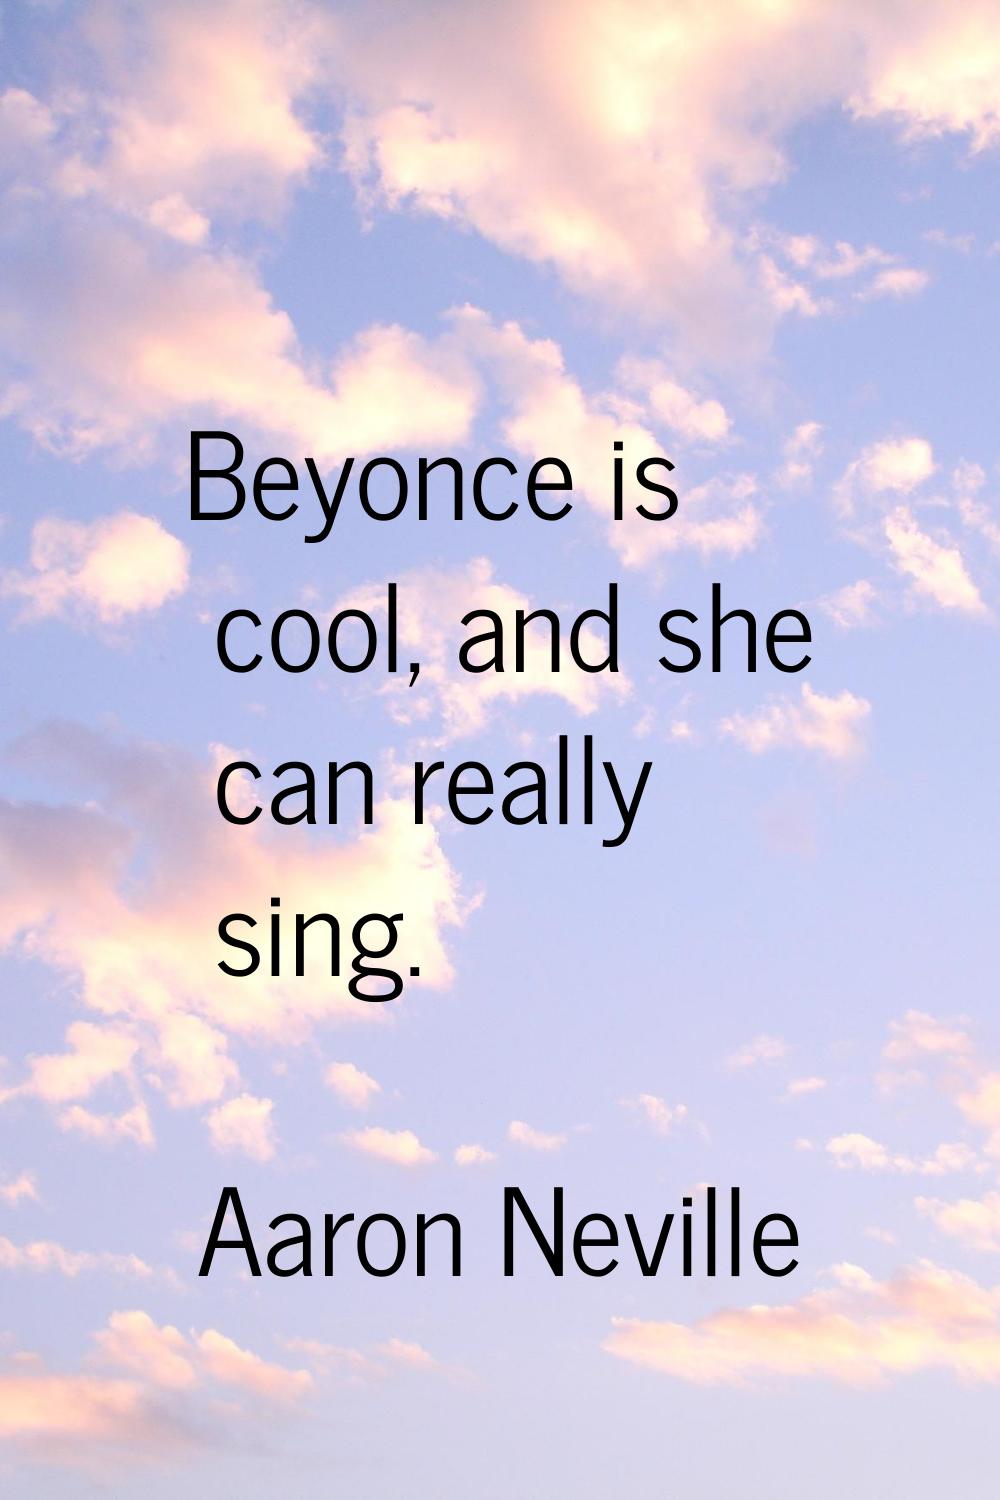 Beyonce is cool, and she can really sing.